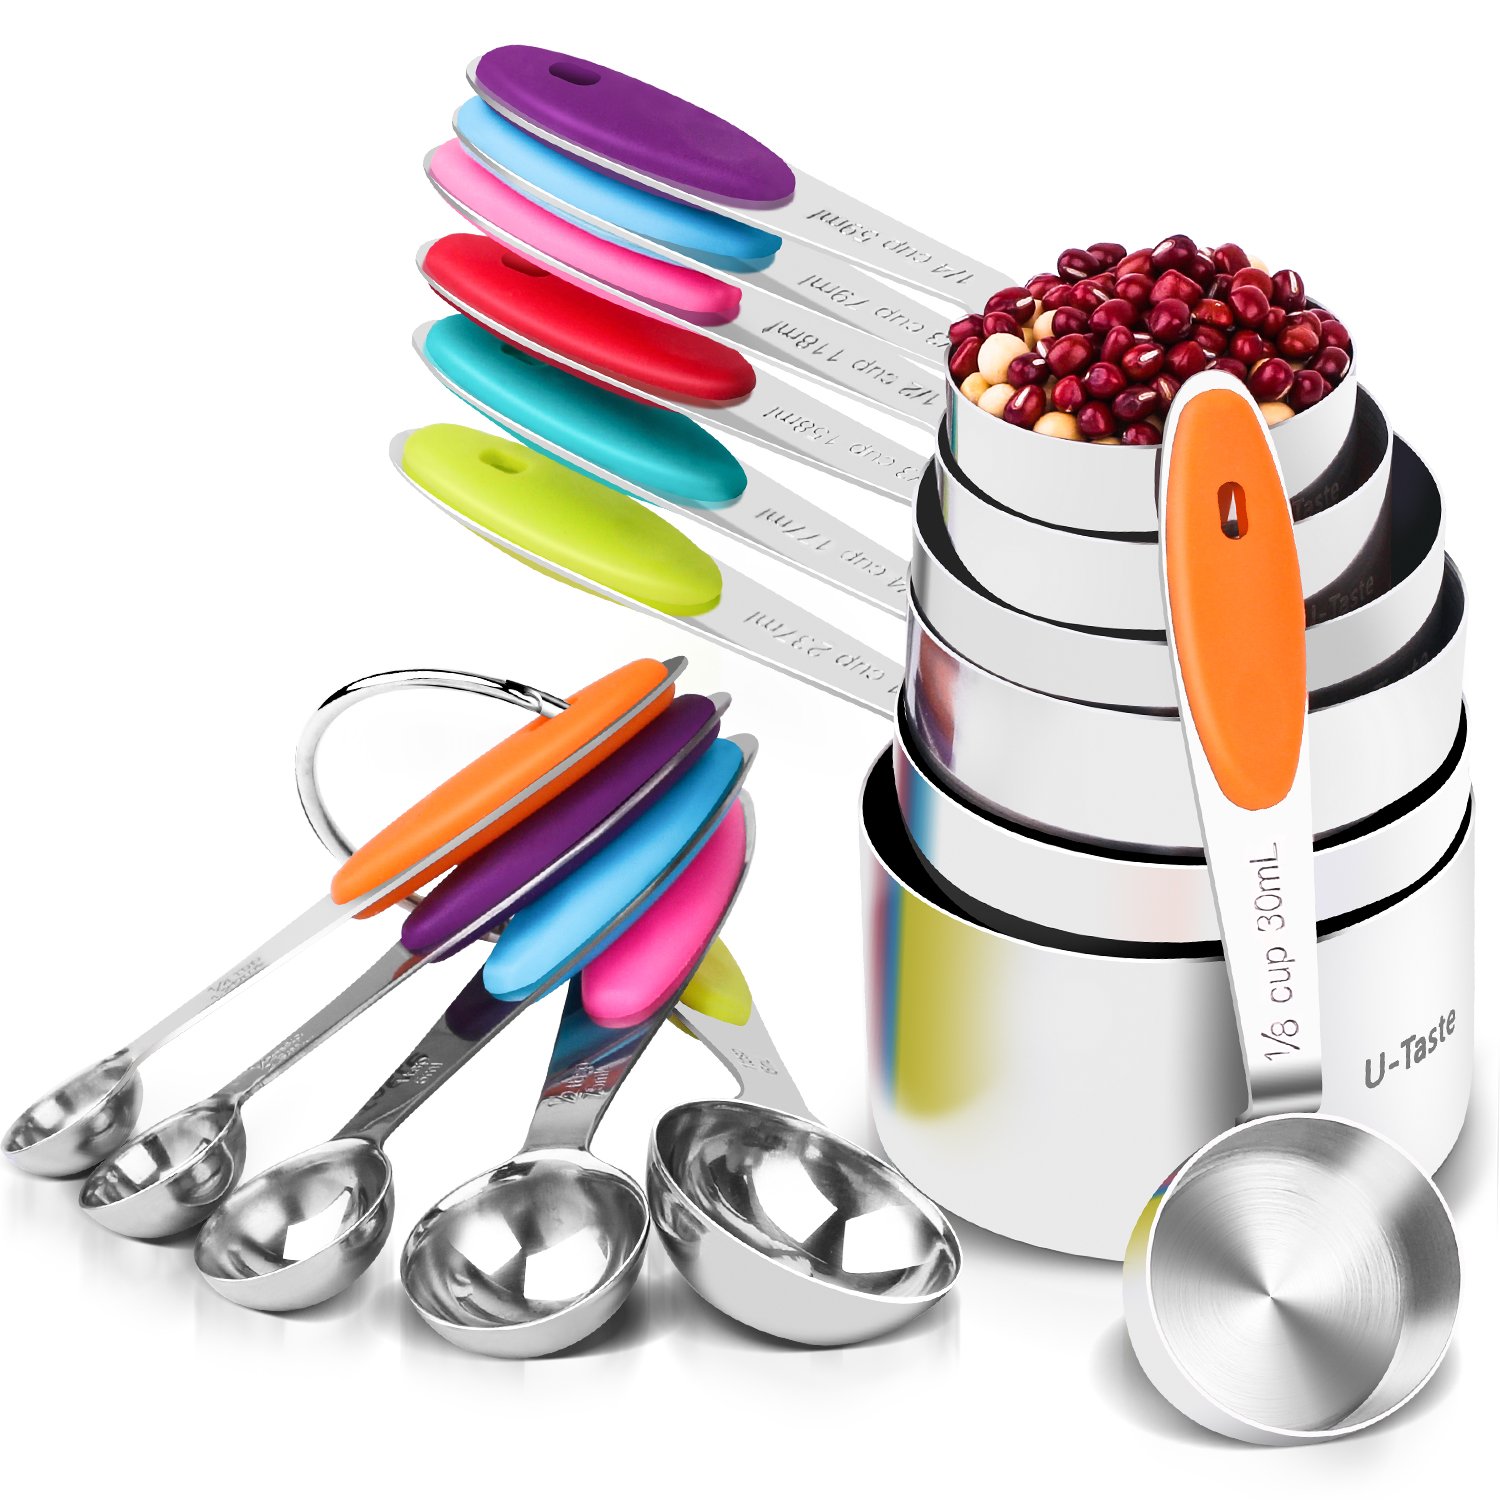 12 Piece Measuring Cups and Spoons Set in 18/8 Stainless Steel : 7 Measuring Cups & 5 Measuring Spoons